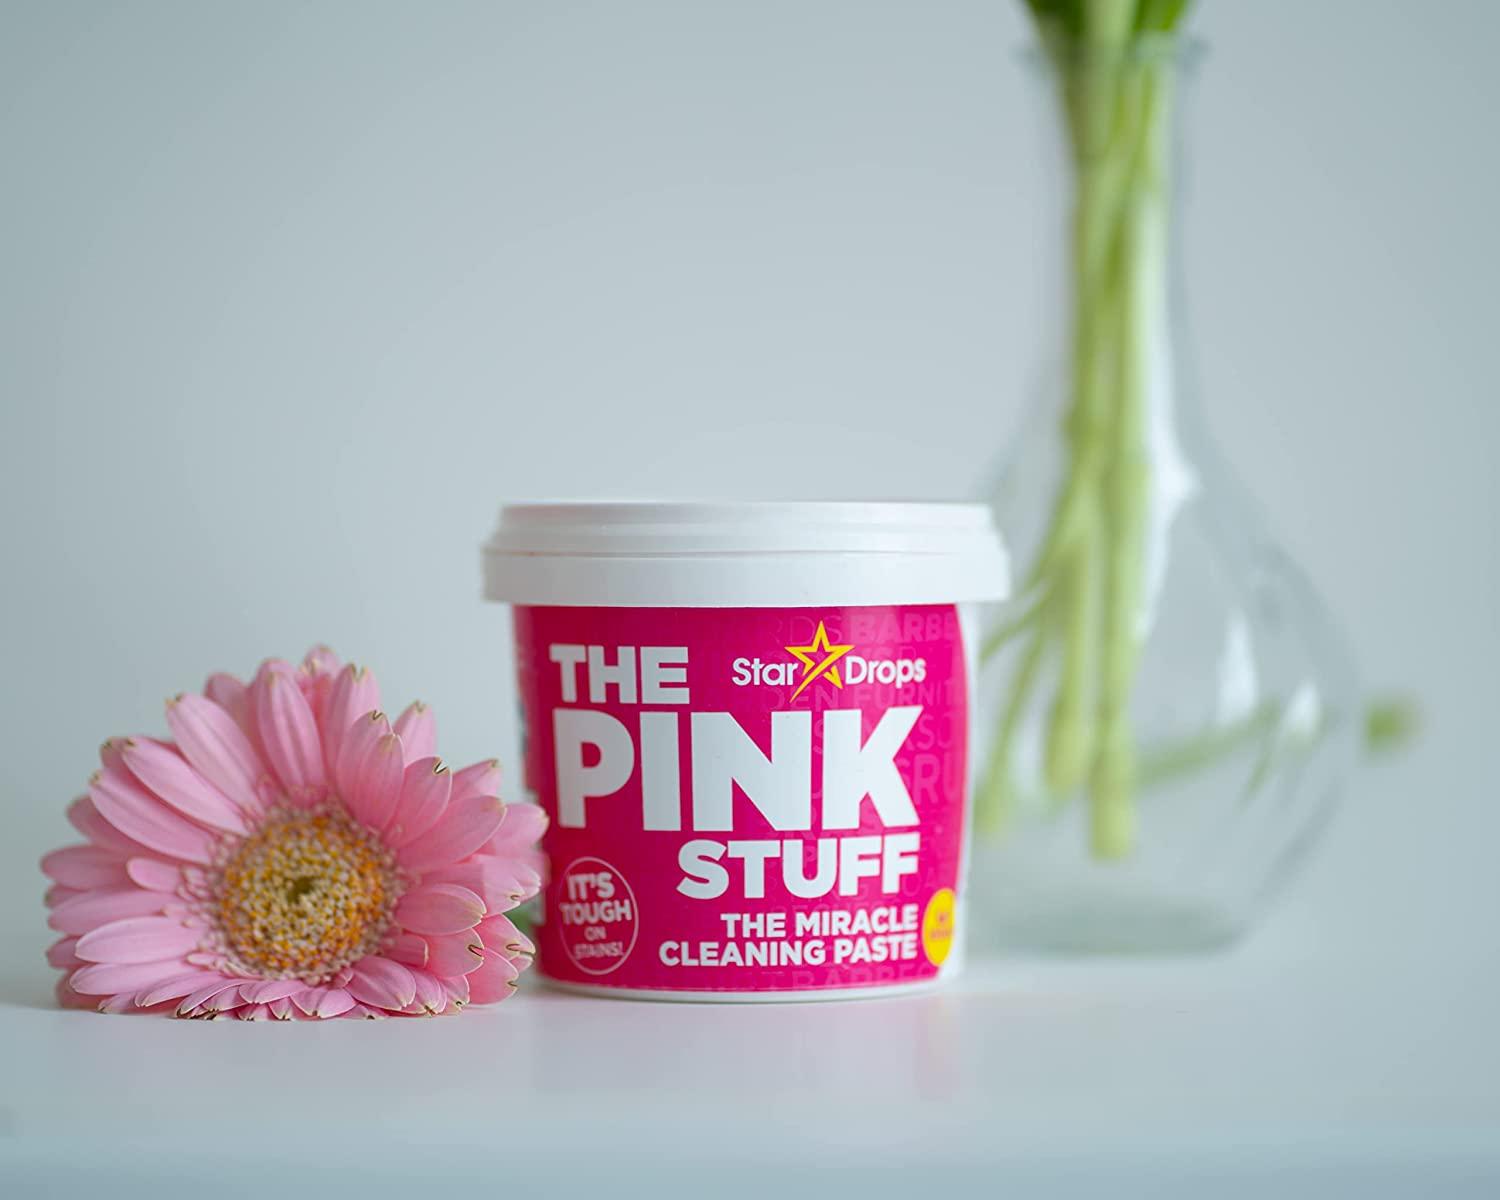 THE PINK STUFF NEW MIRACLE CLEANING KIT REVIEW / THE MIRACLE